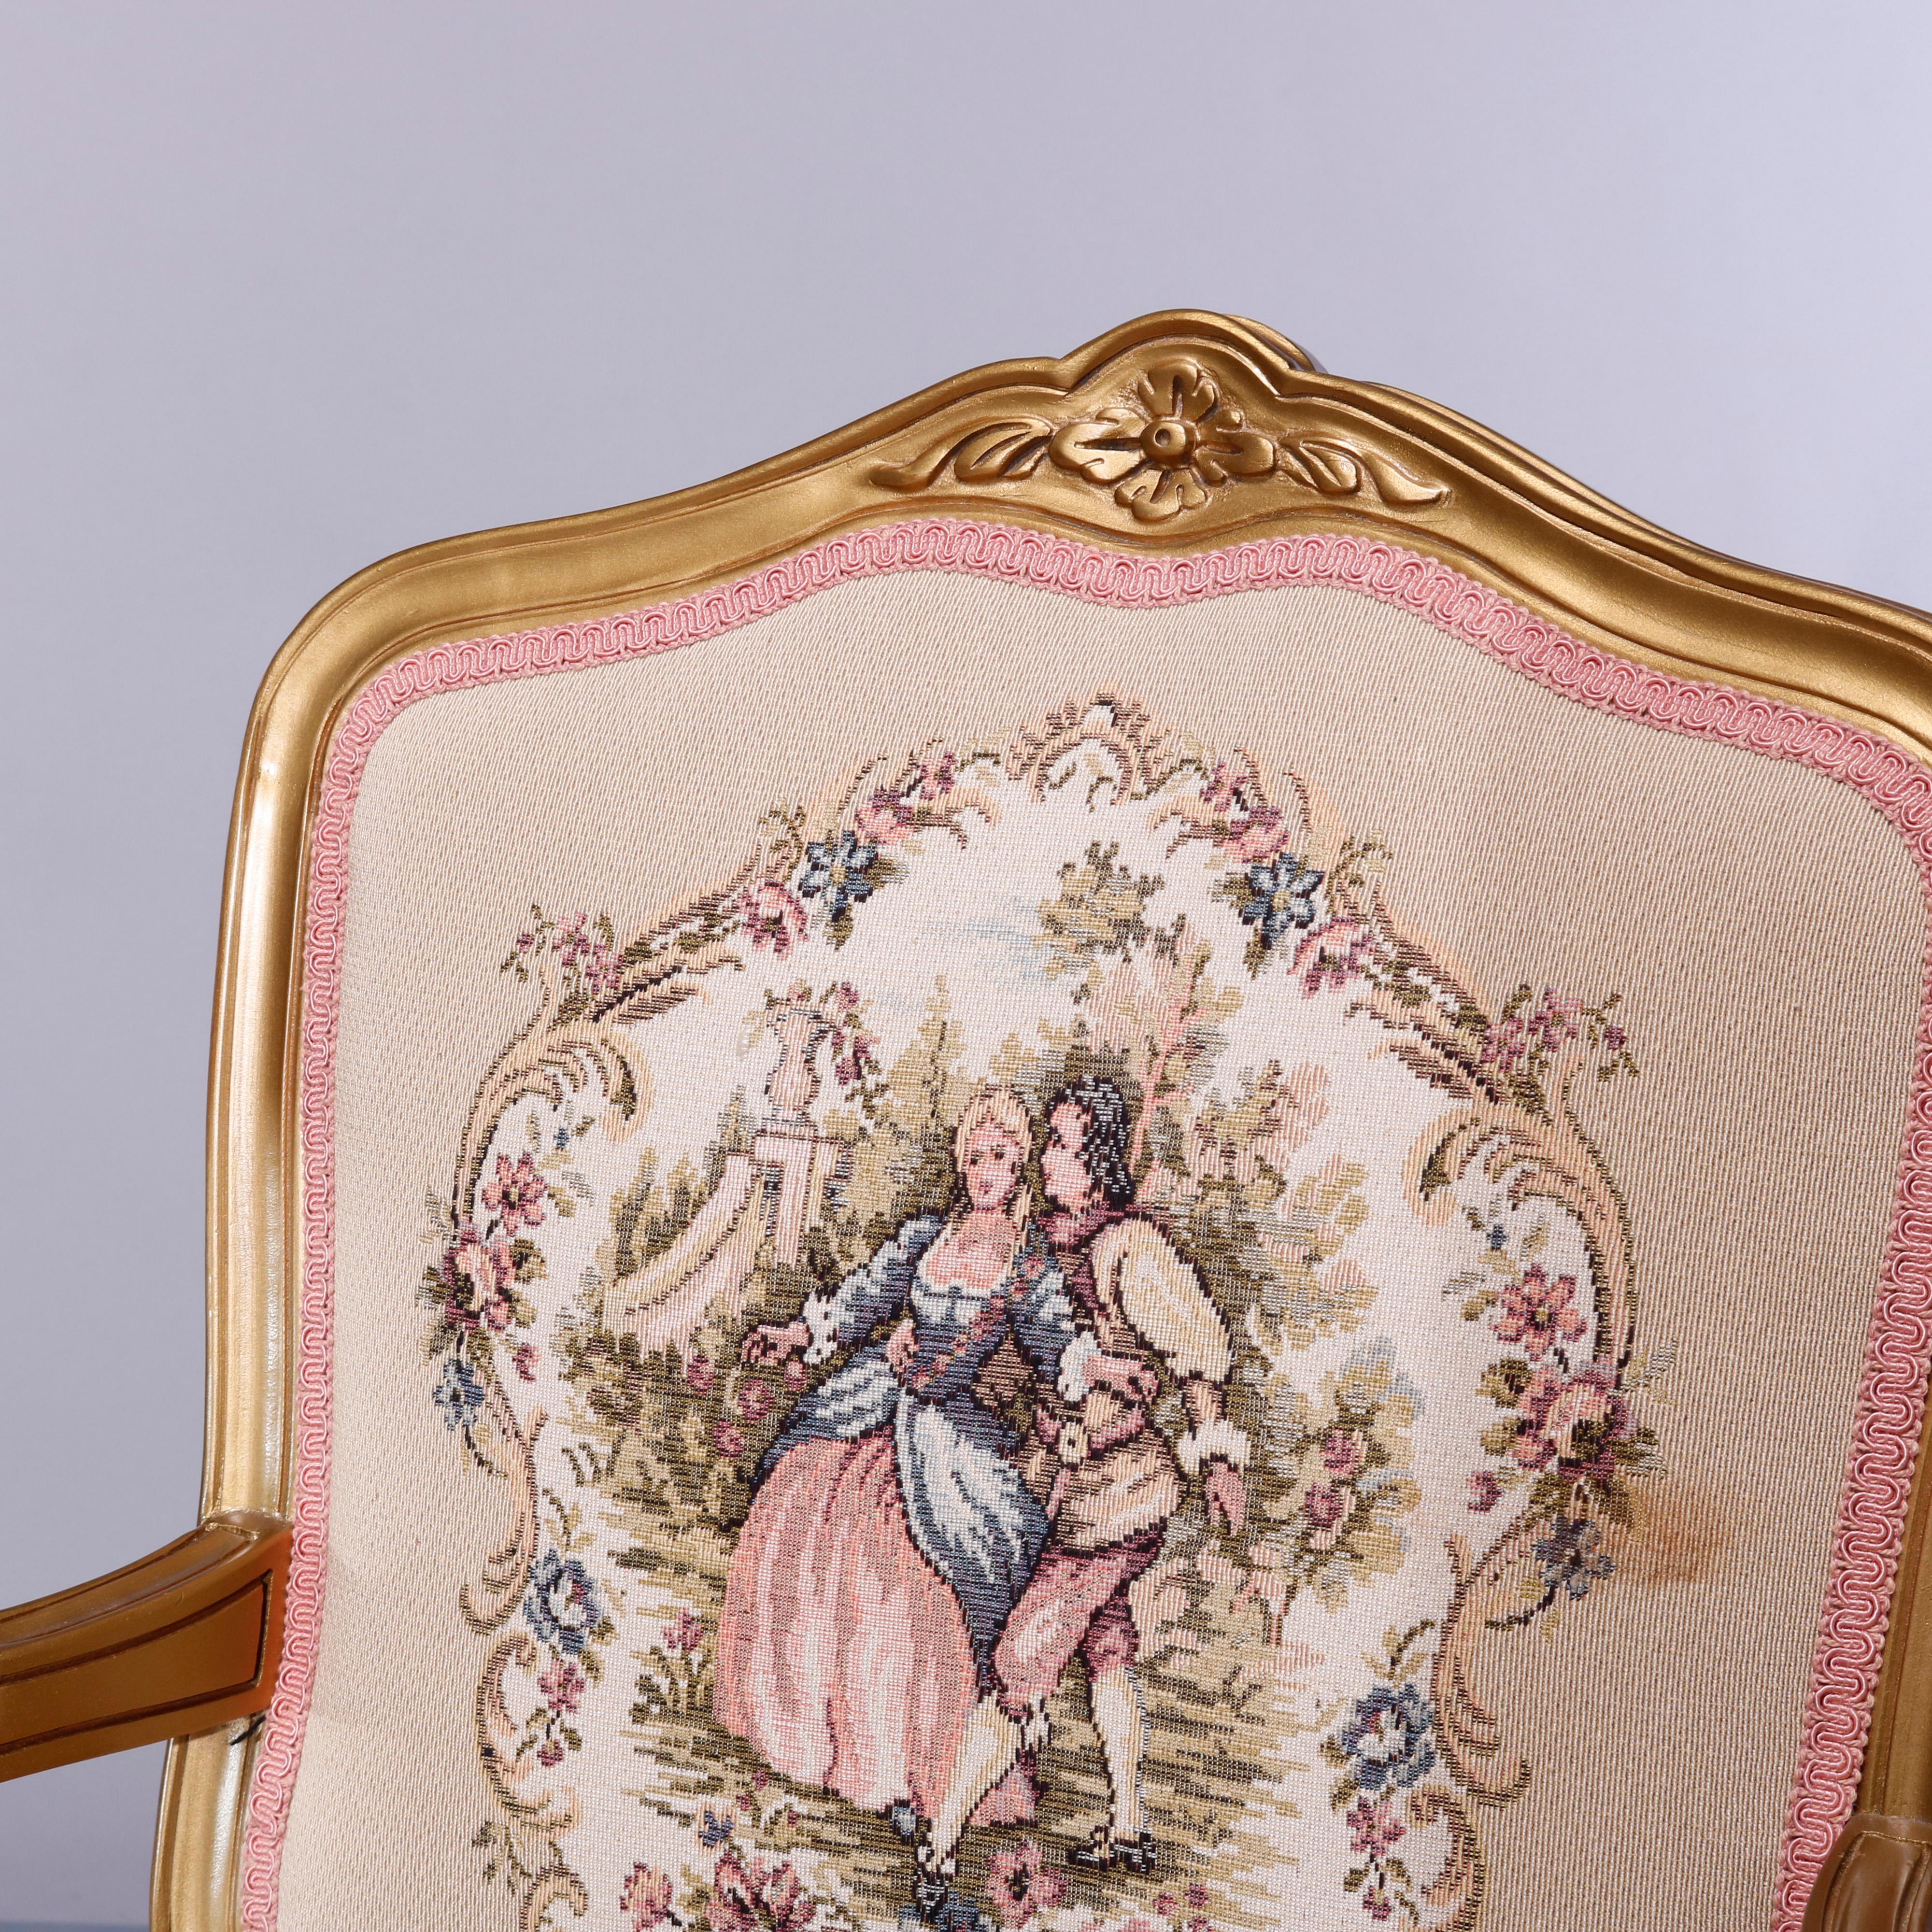 An antique French Louis XV style fauteuil offers giltwood frame with floral crest over back with courting scene tapestry and floral bouquet seat, raised on cabriole legs with carved floral knees and scroll feet, 20th century

Measures: 36.75